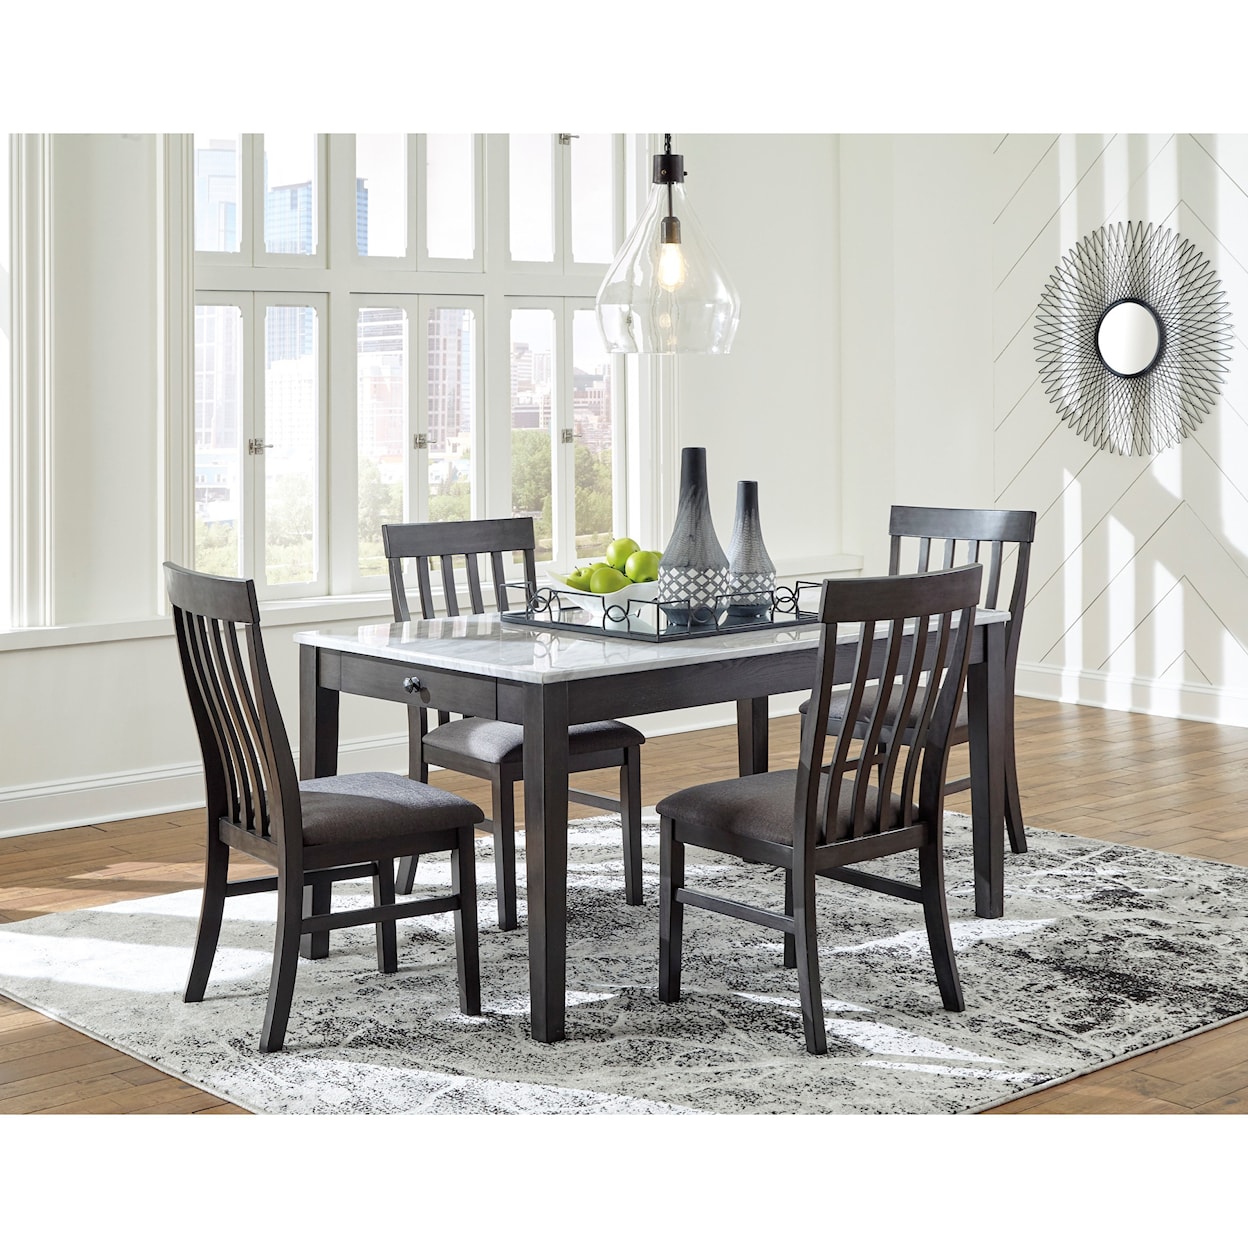 Benchcraft Luvoni Dining Upholstered Side Chair